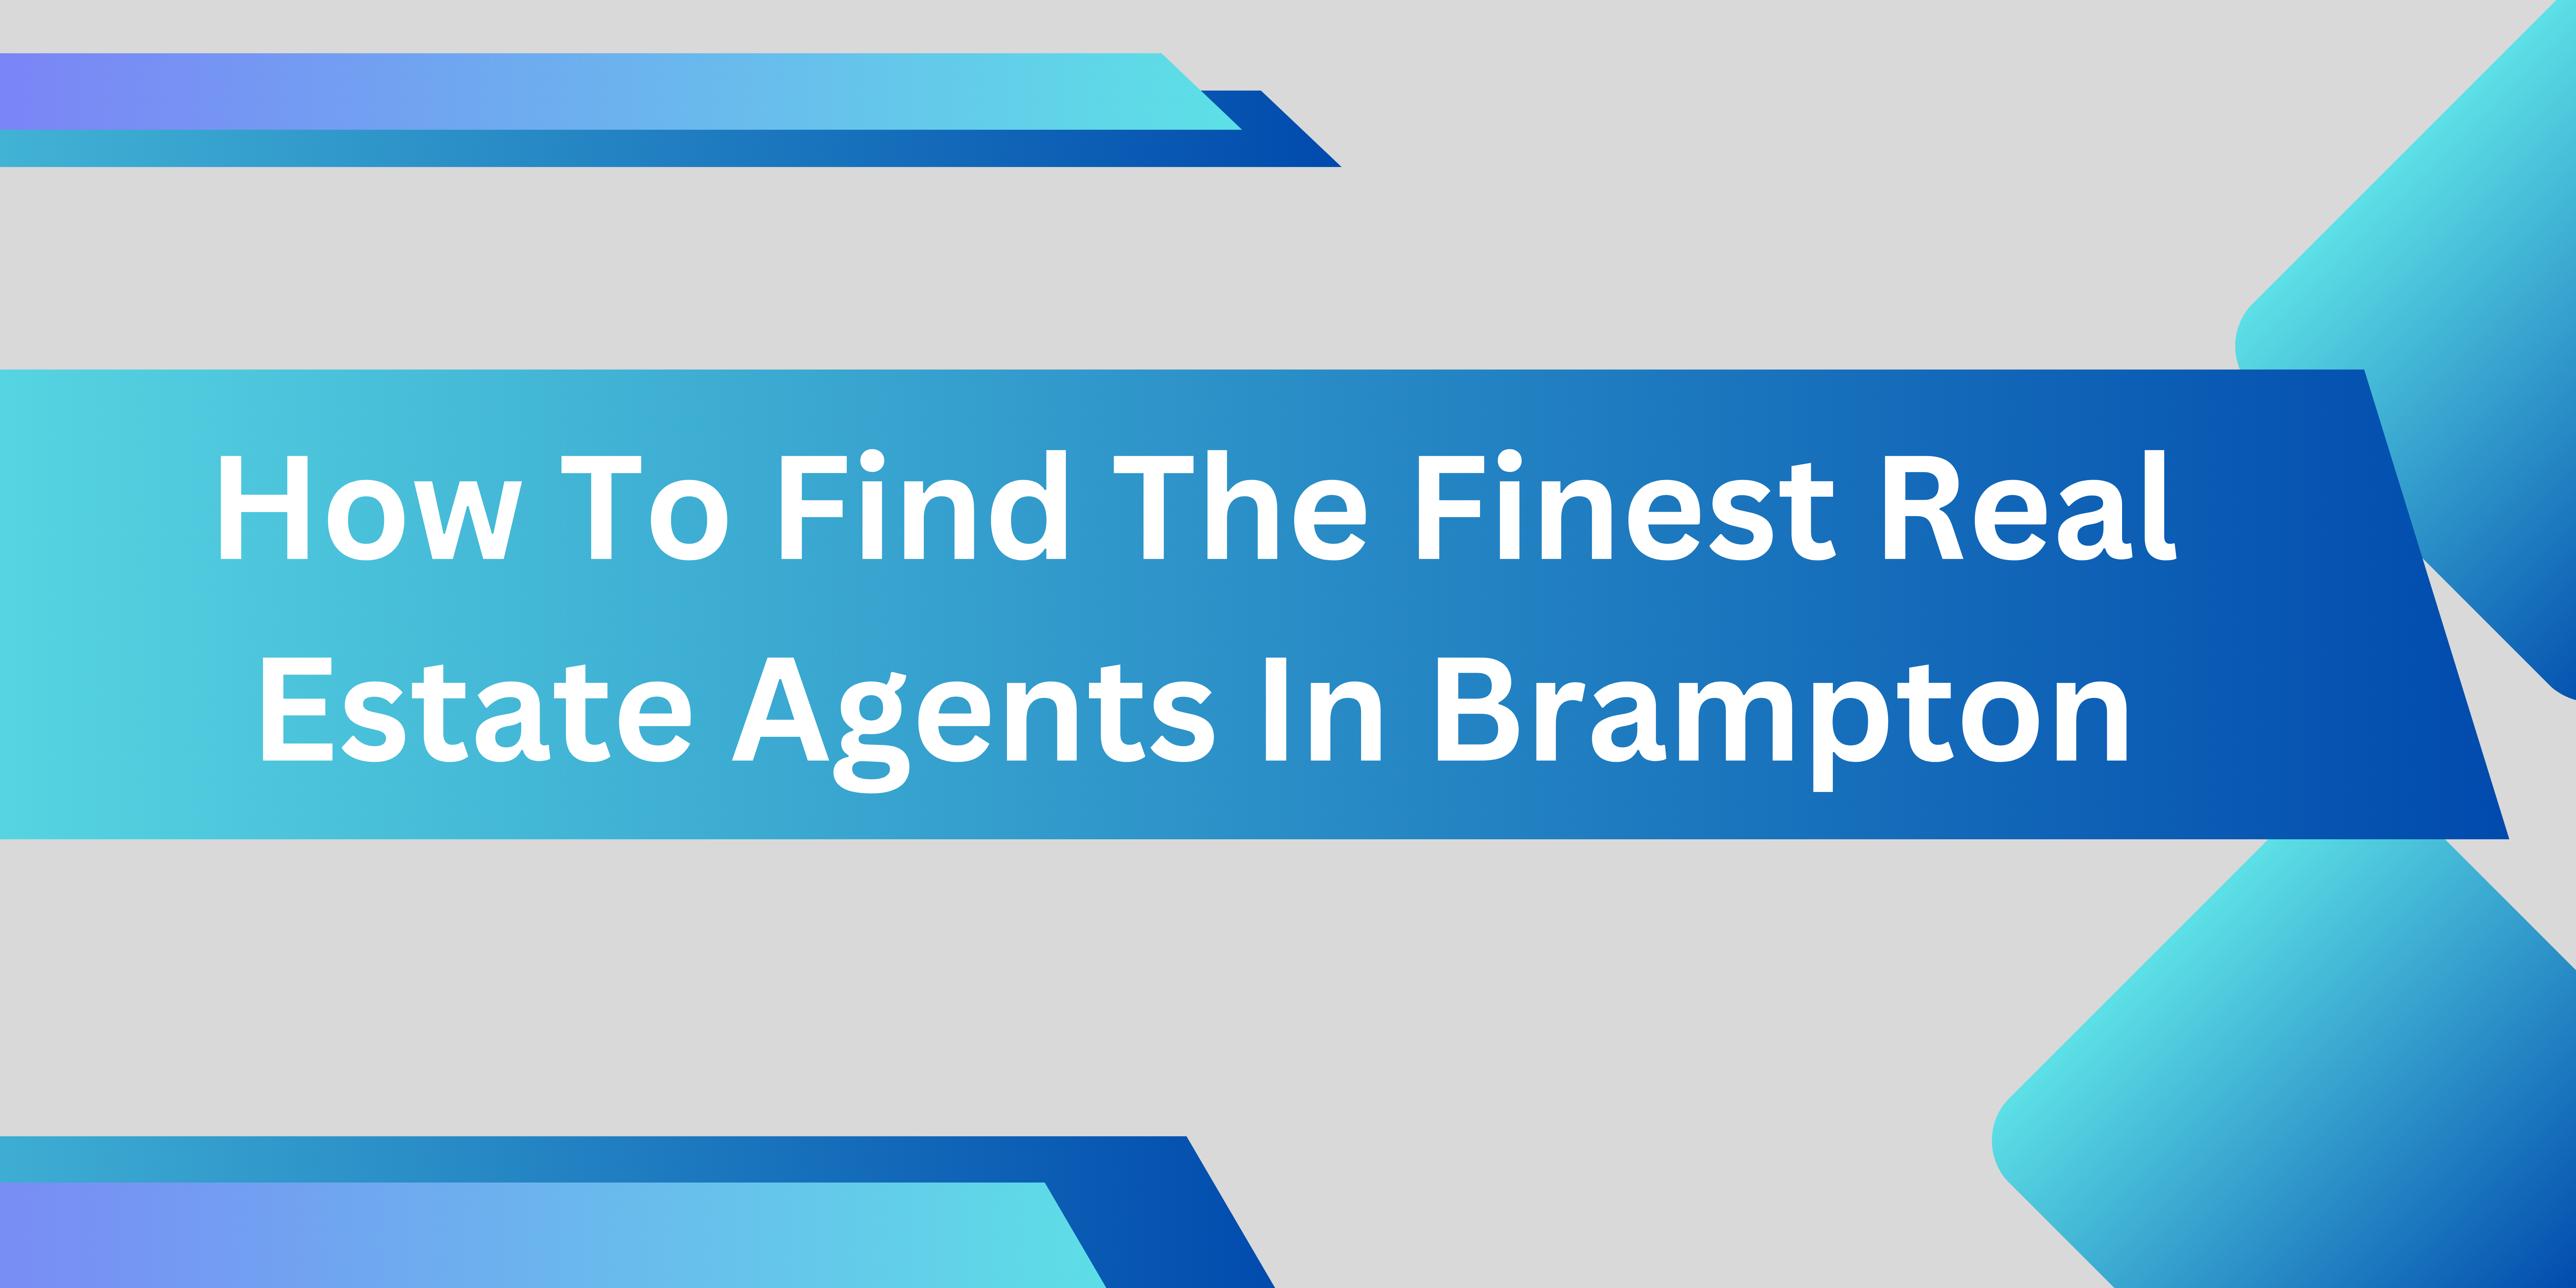 How To Find The Finest Real Estate Agents in Brampton By Being Well-informed?